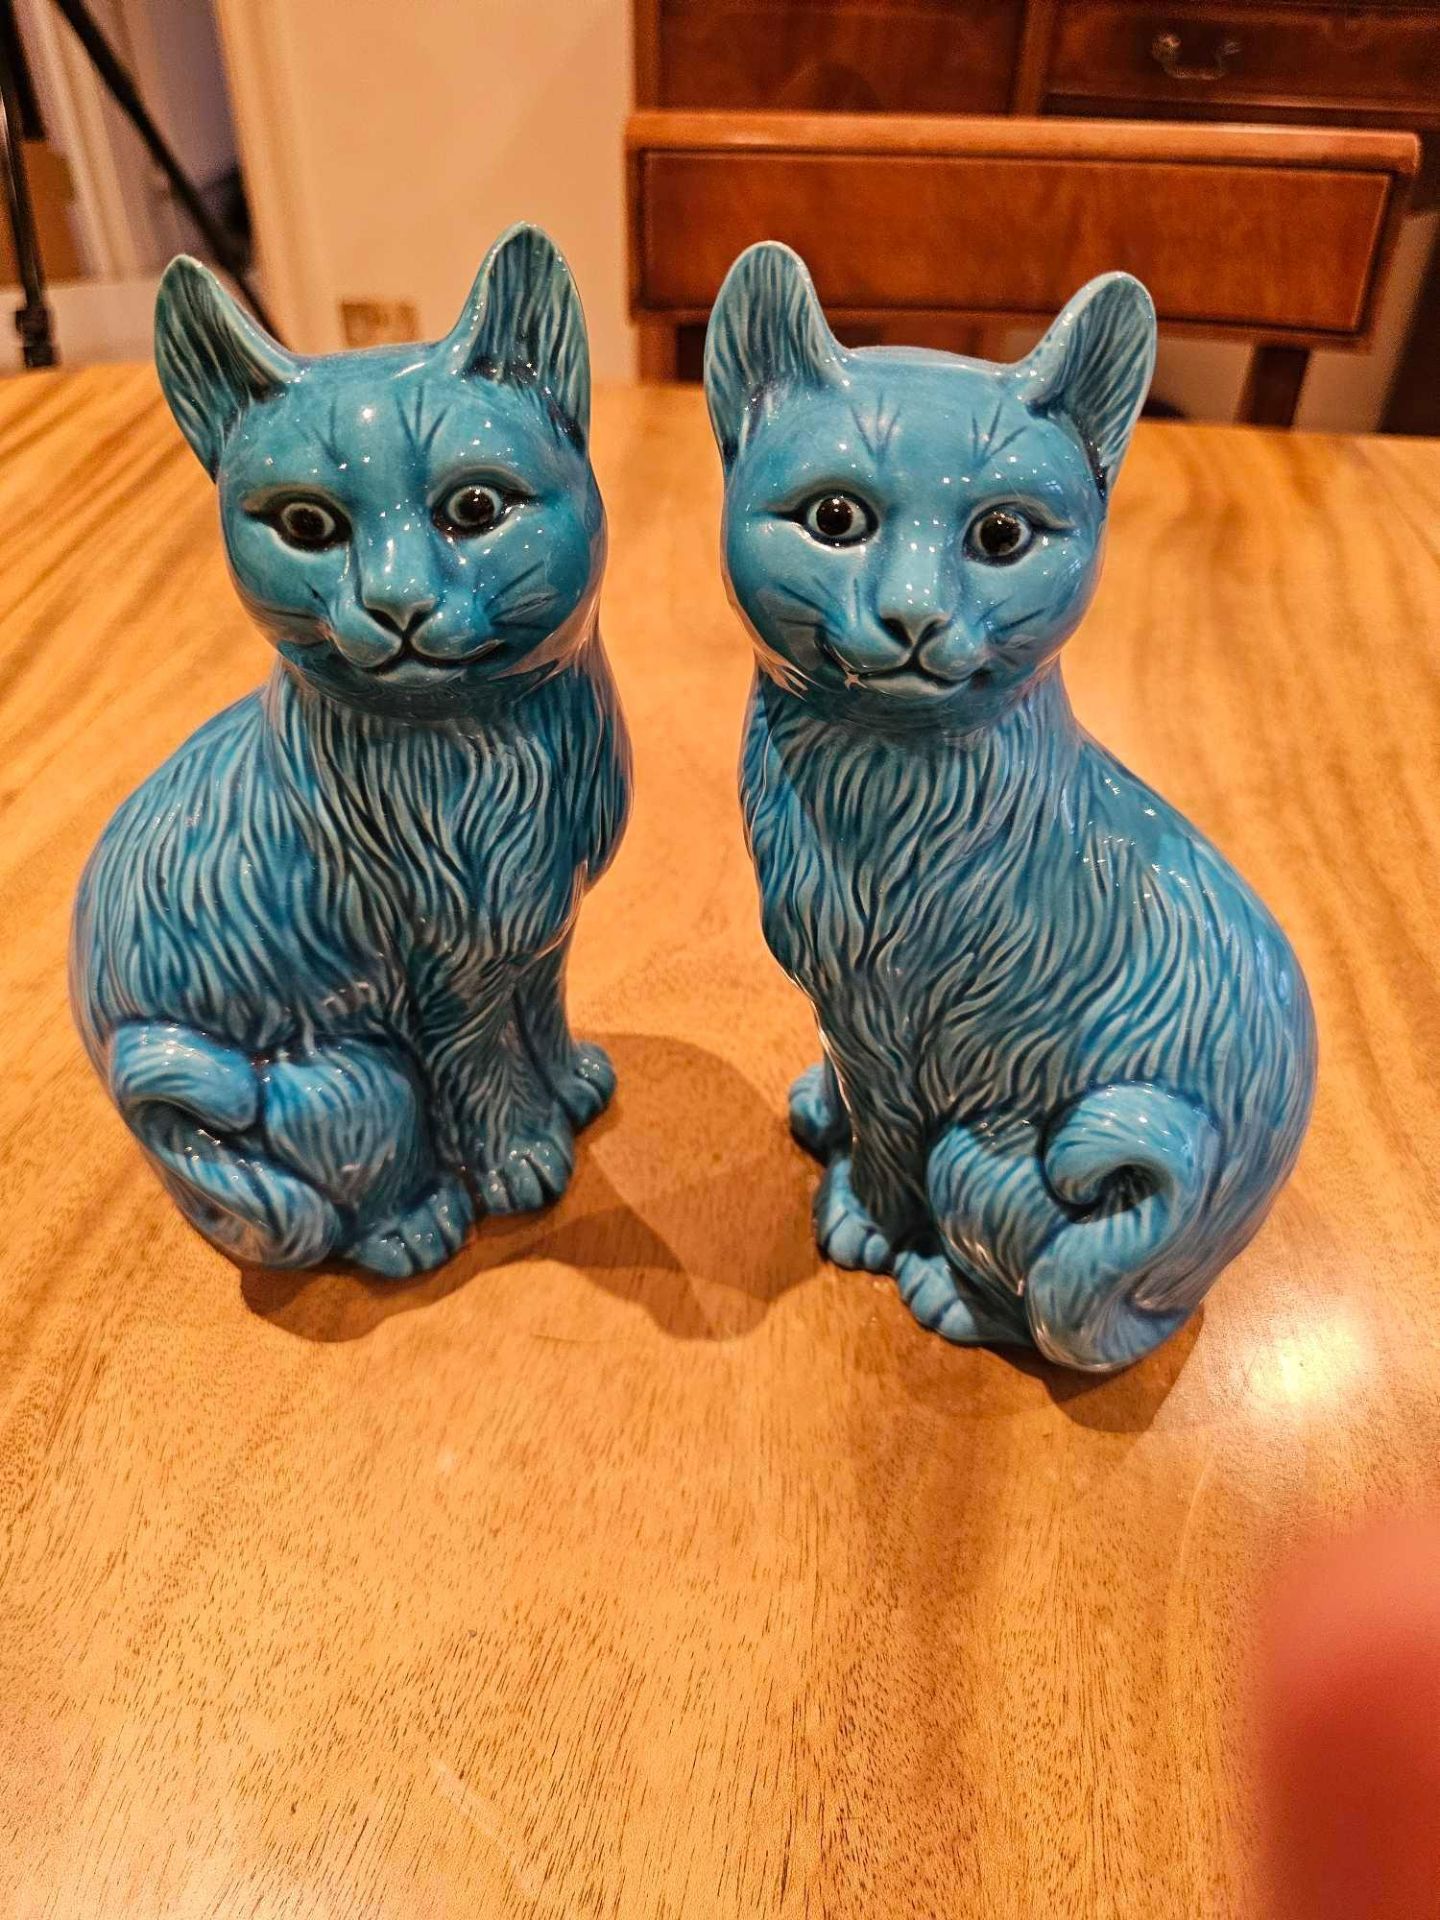 Turquoise Glazed Vintage Collectible Set Of 2 Cats - Faience Majolica Made In China - Image 2 of 3